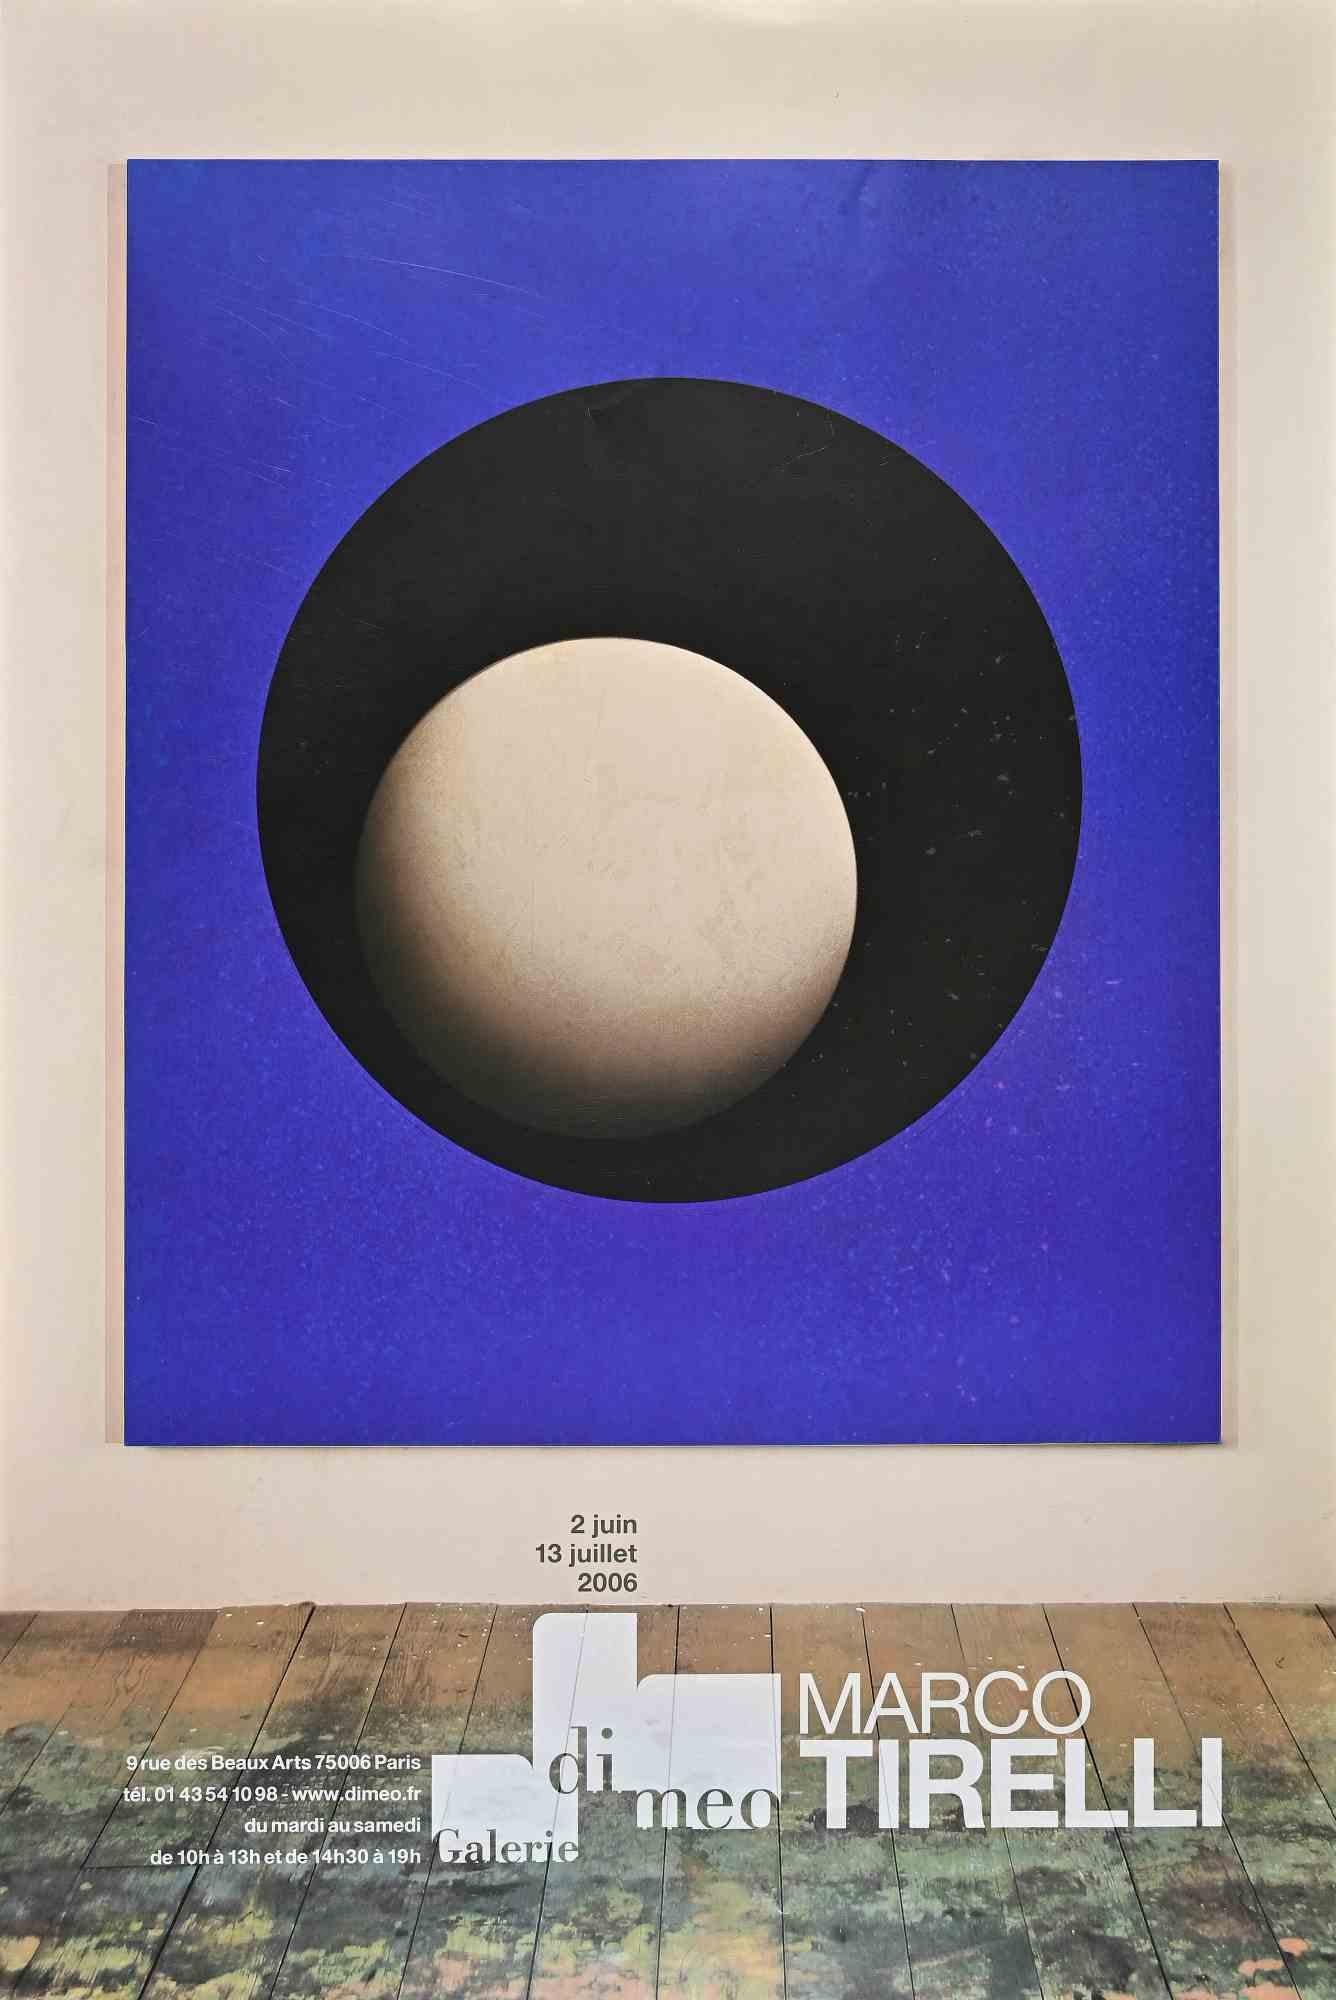 Marco Tirelli - Poster is a vintage offset poster realized for the exhibition by Marco Tirelli at Galerie Di Meo in 2006.

The artwork is represented in a well-balanced composition.

 